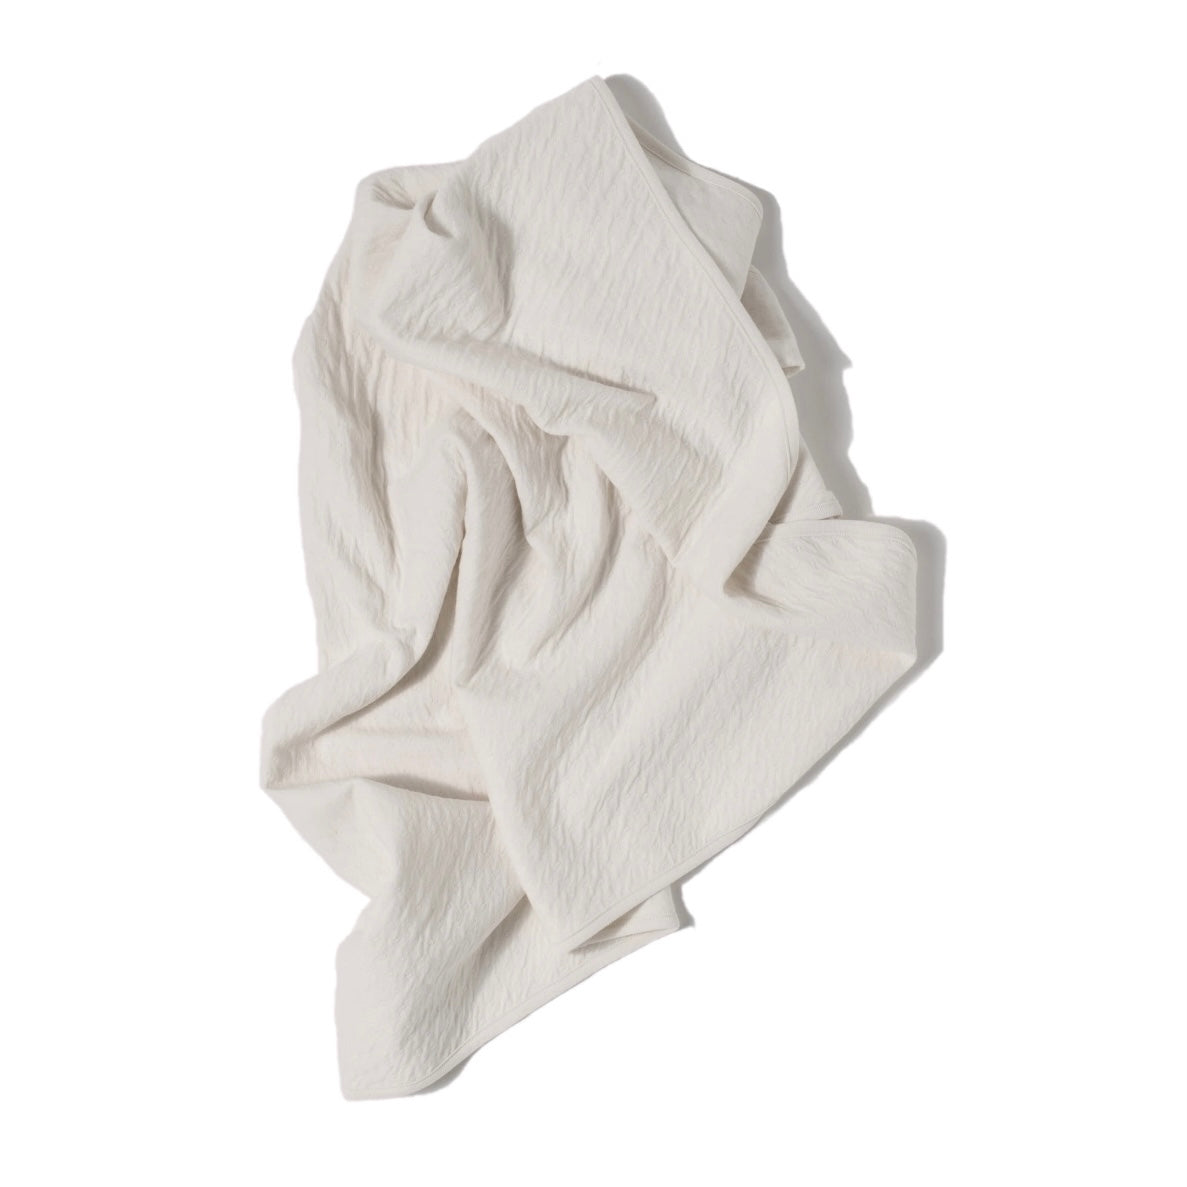 cream color pointelle ribbed knit double layered essential swaddle blanket. 33" x 33".  100% organic cotton.